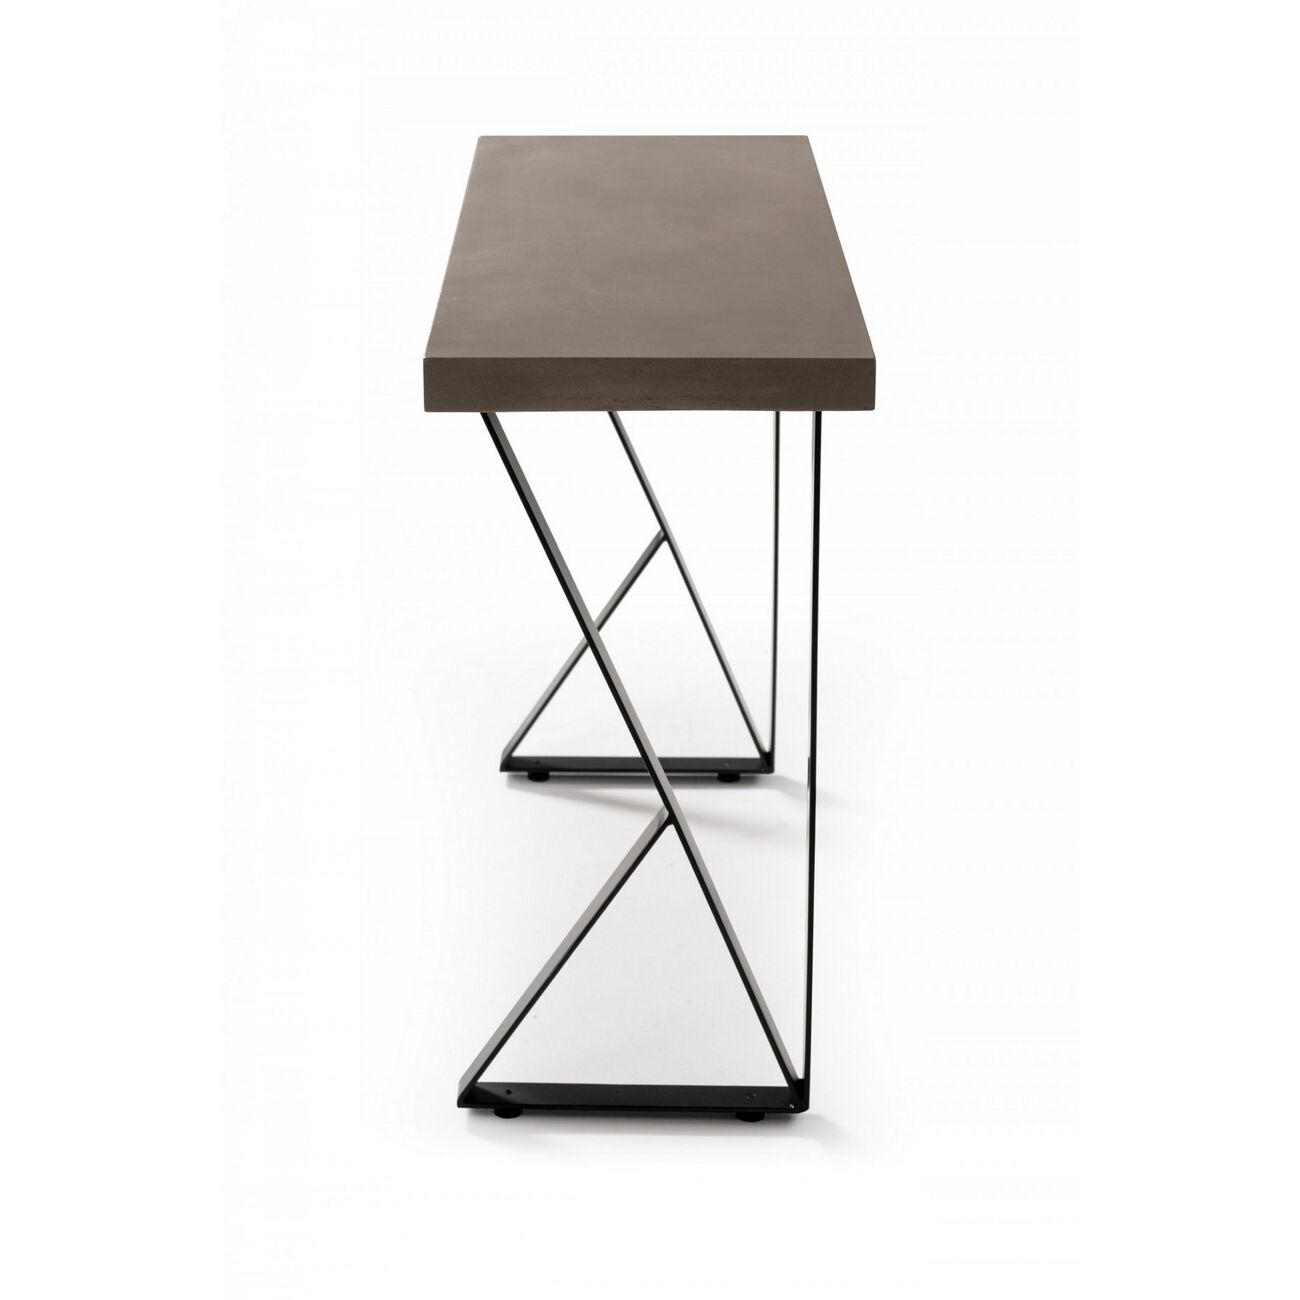 Rectangular Concrete Top Console Table with Metal Legs, Gray and Black